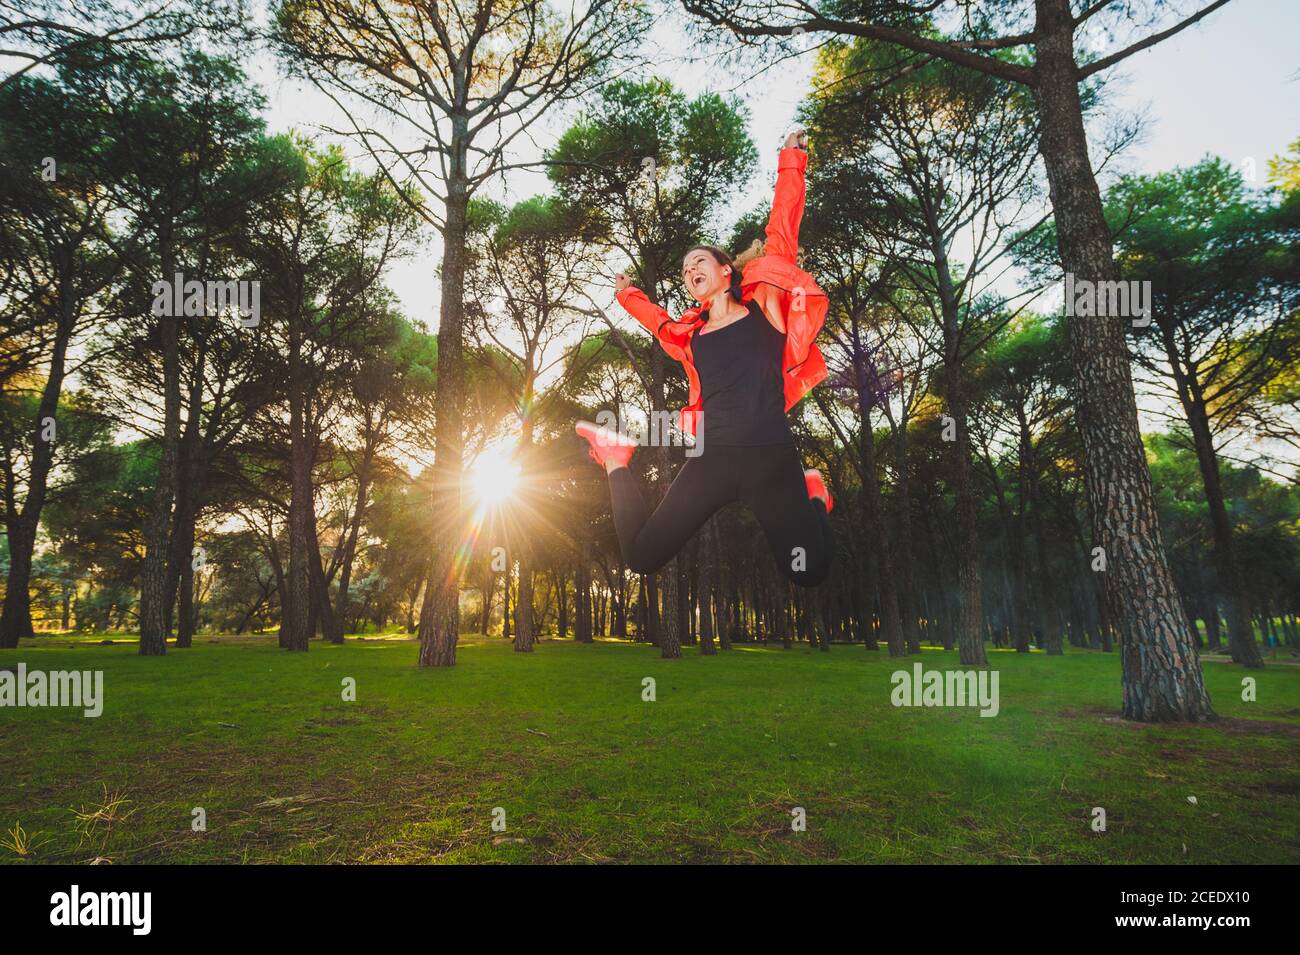 Bright happy Woman in sportive outfit jumping high above green meadow in sunny park Stock Photo